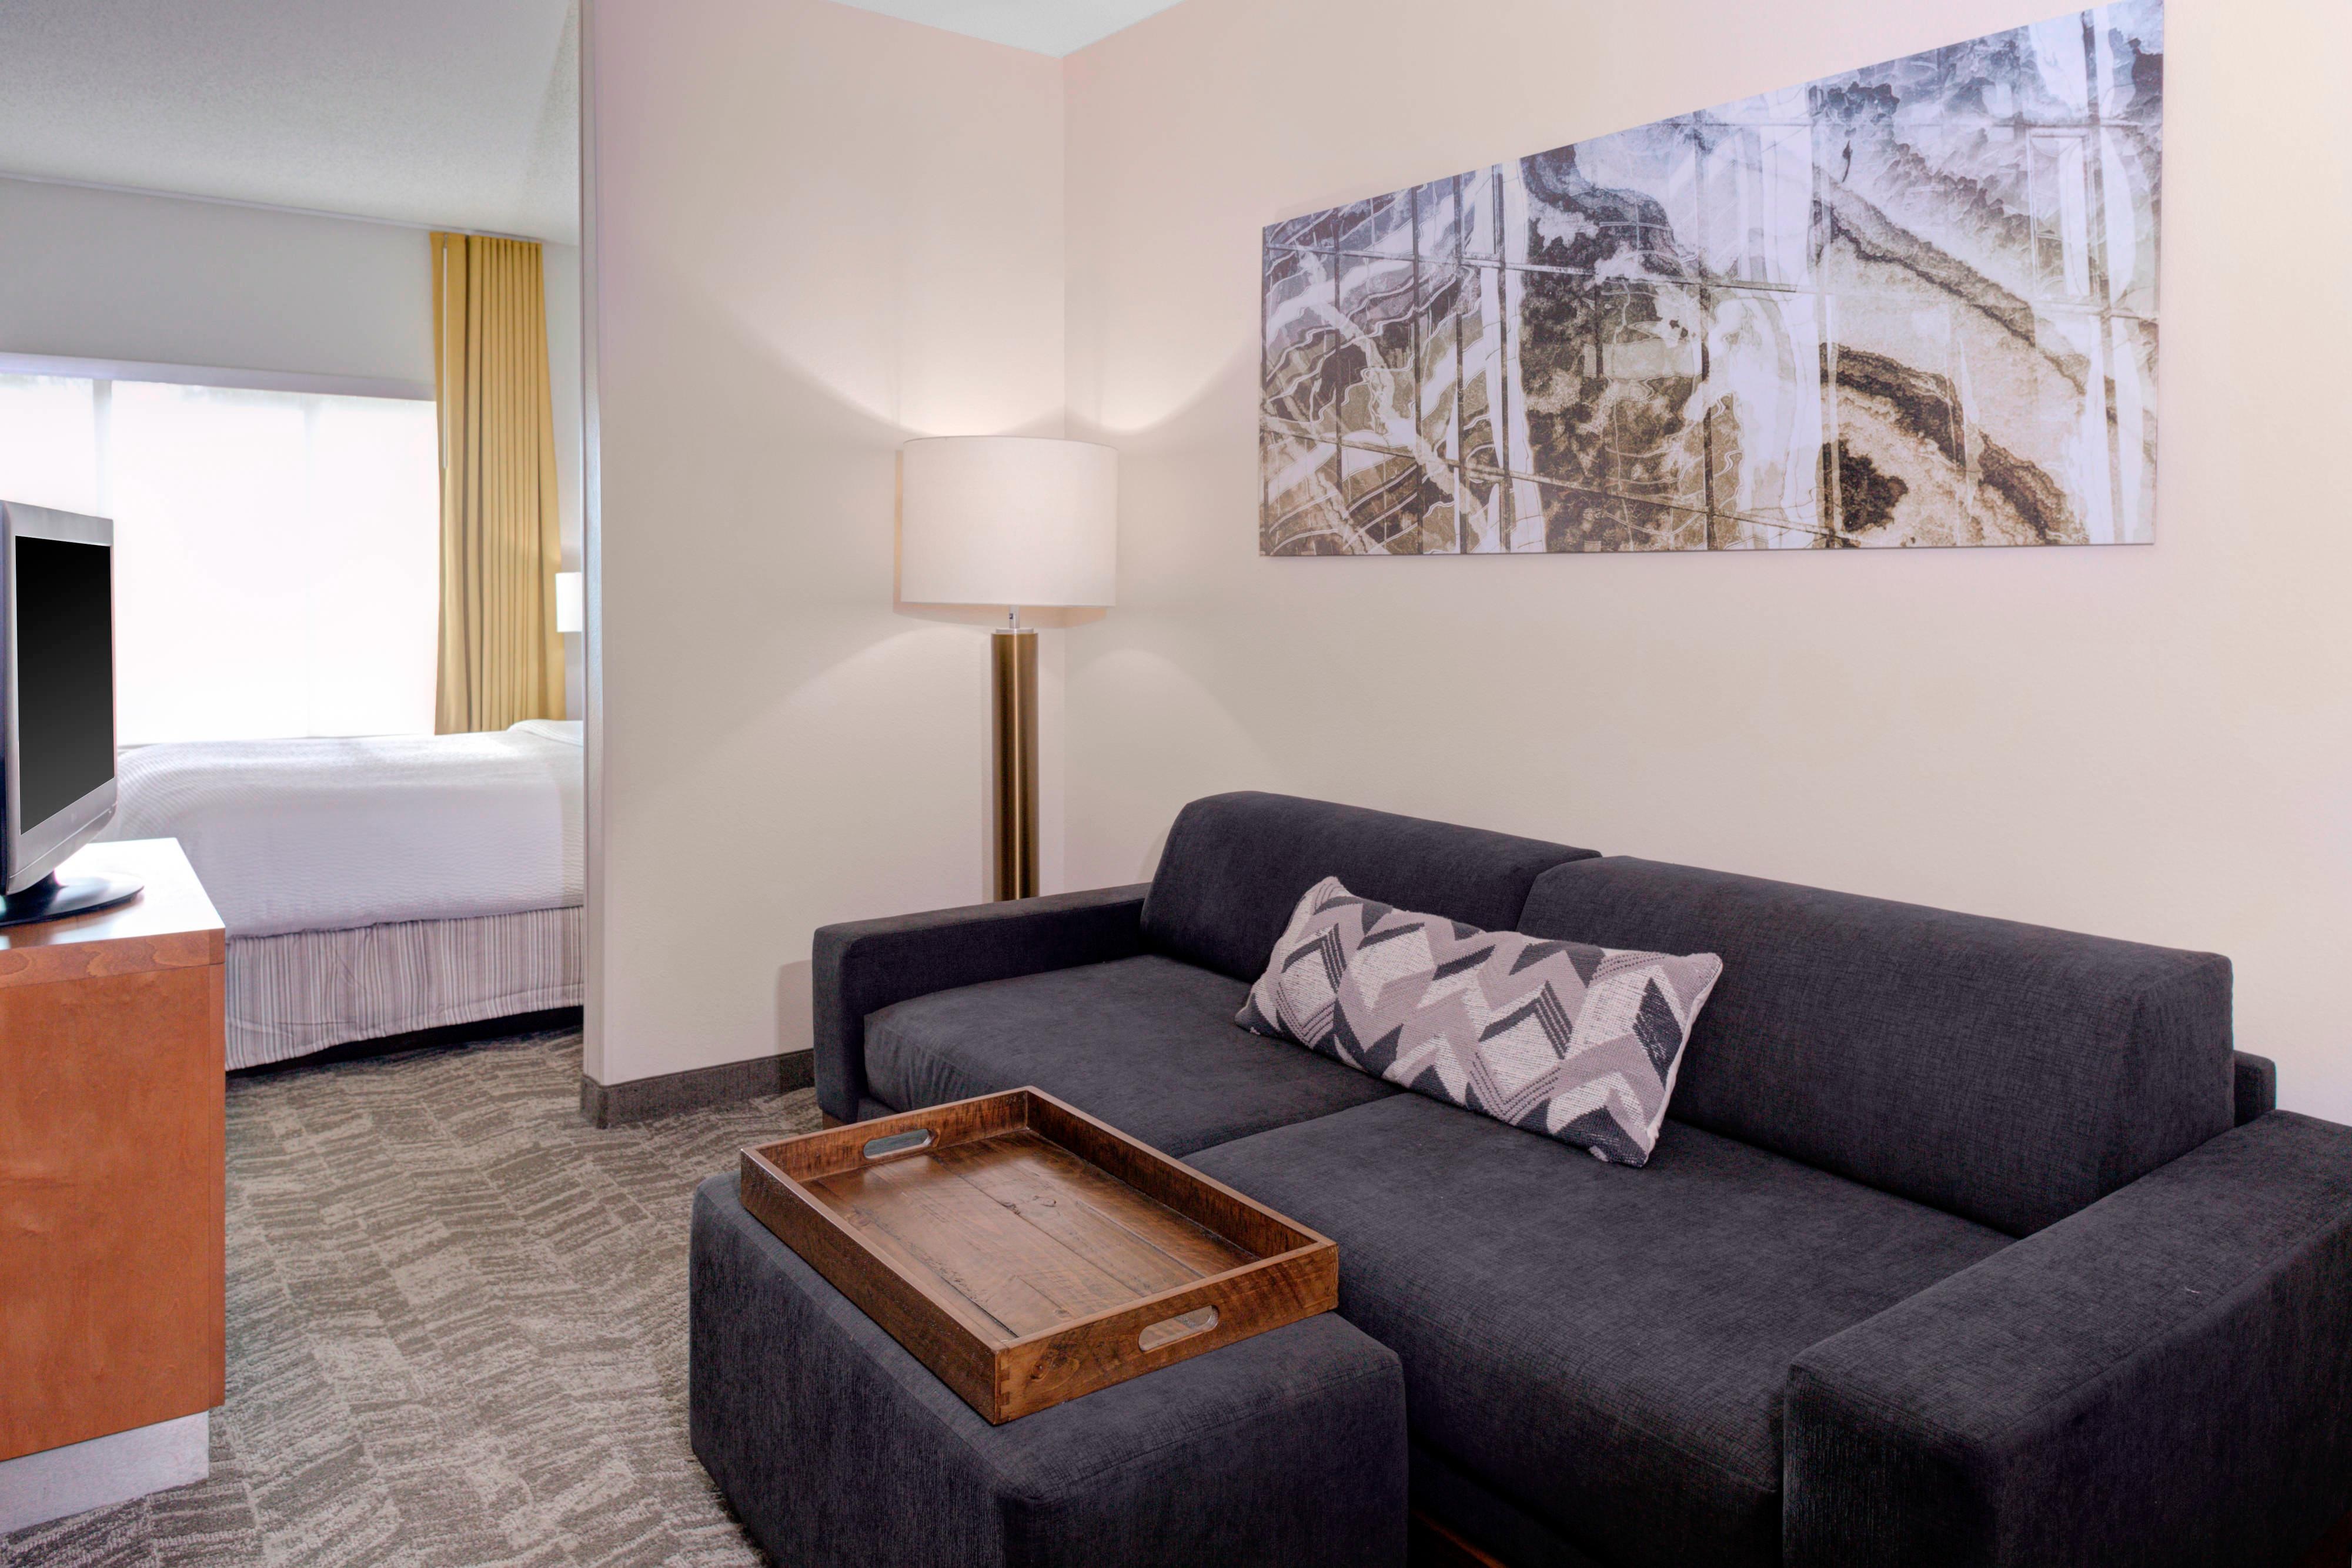 Memphis Hotels | Hotels near Wolfchase Mall | SpringHill Suites Memphis East